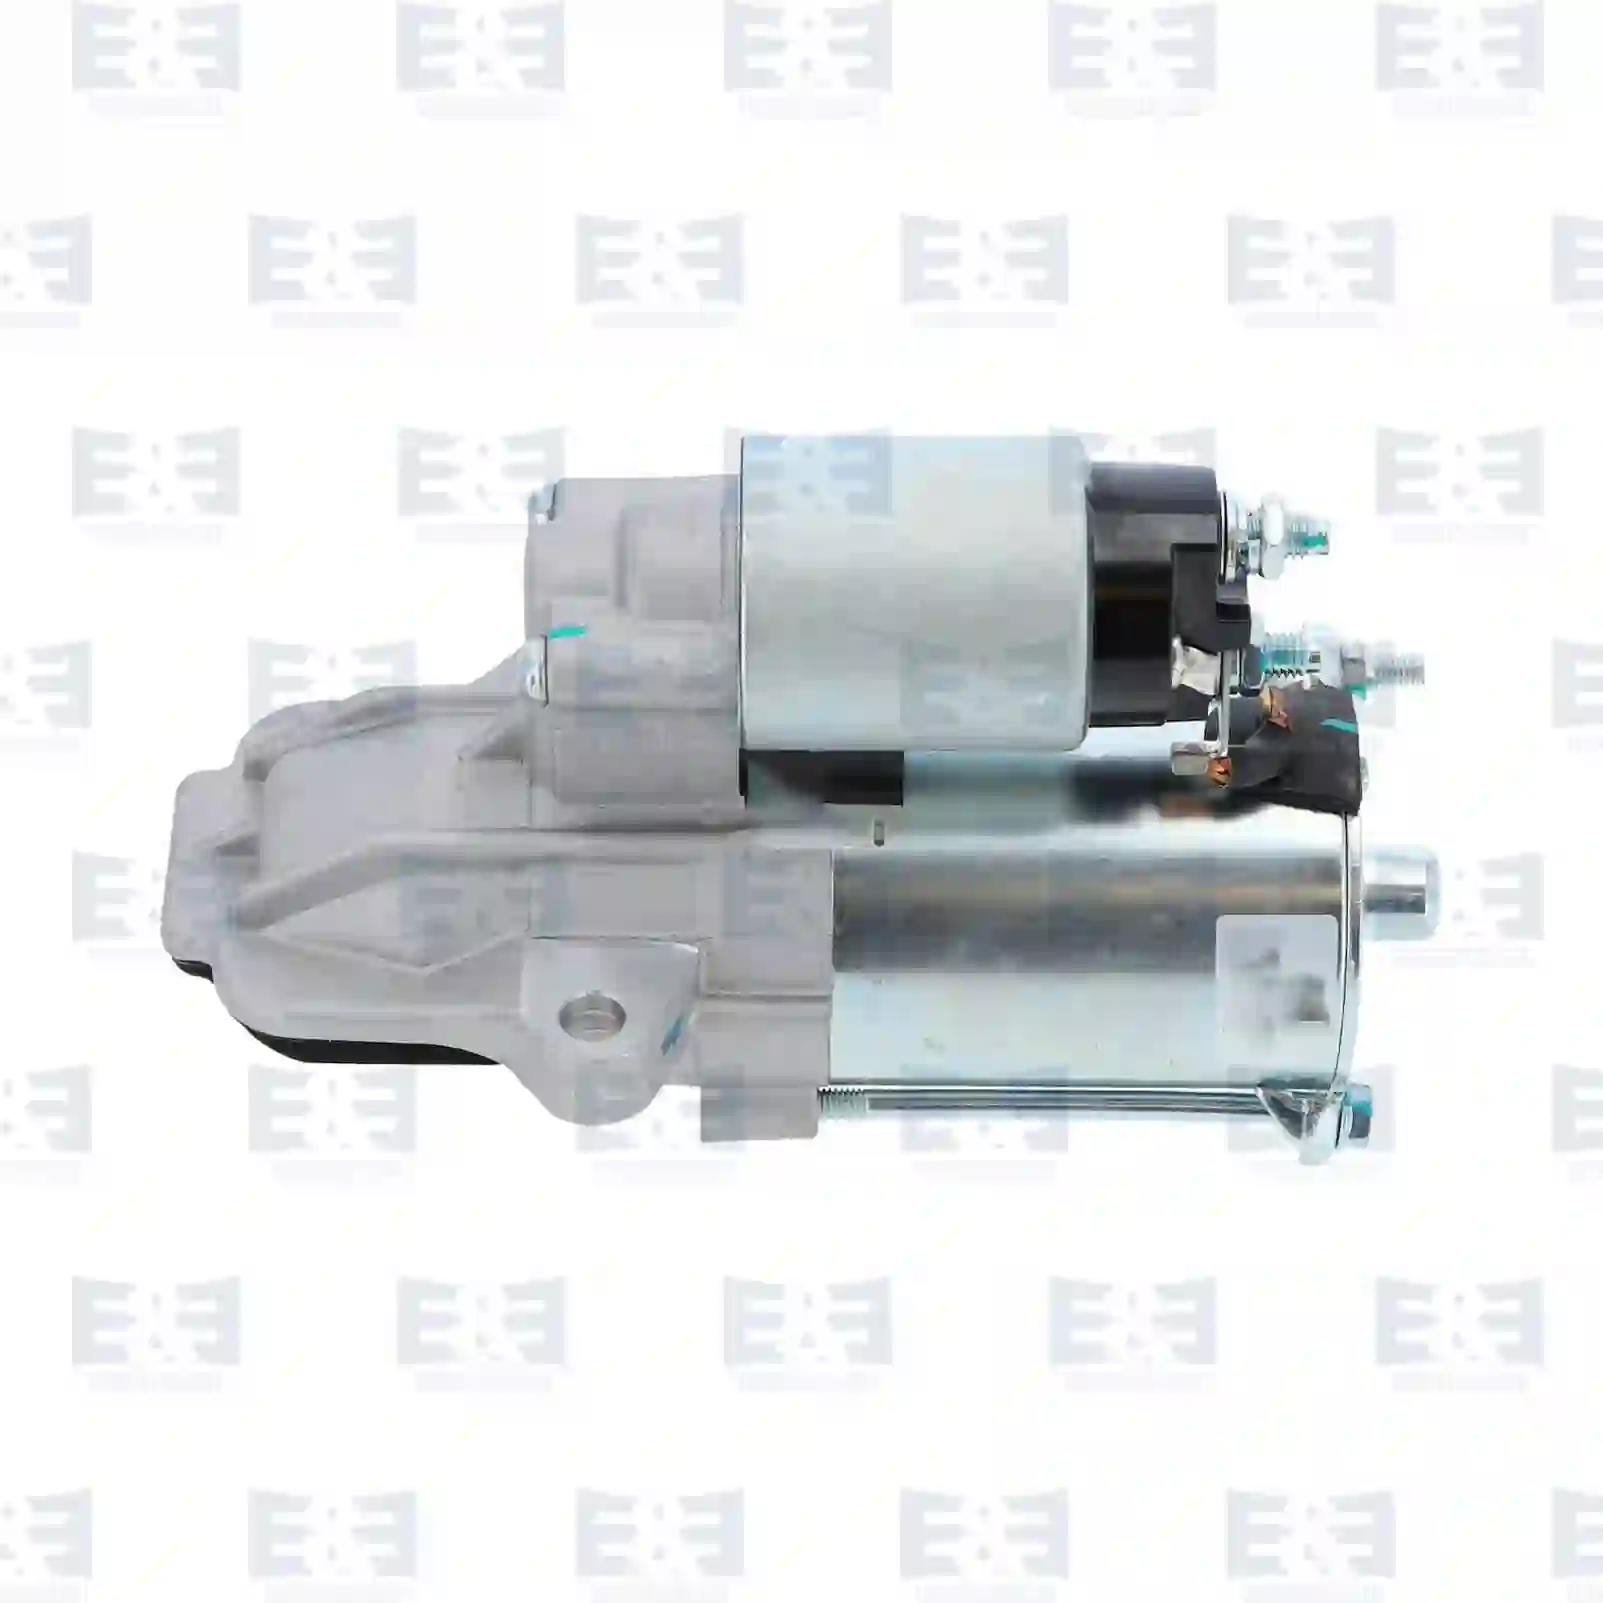 Starter Motor Starter, EE No 2E2290913 ,  oem no:1251700, 1300504, 1366986, 1379702, 1387091, 1477482, 1525794, 1762876, 1762877, 3M5T-11000-AB, 3M5T-11000-AC, 3M5T-11000-AD, 3M5T-11000-AE, 4542546, 4587107, 4635595, 4727857, 4918434, 4S4T-11000-AA, 5S4T-11000-AA, 6G9N-11000-AA, 6G9N-11000-AB, 6S4T-11000-AA, 30667059, 30667299, 30667738, 30795405, 31268034, 36002497, 8603292, 8603689 E&E Truck Spare Parts | Truck Spare Parts, Auotomotive Spare Parts